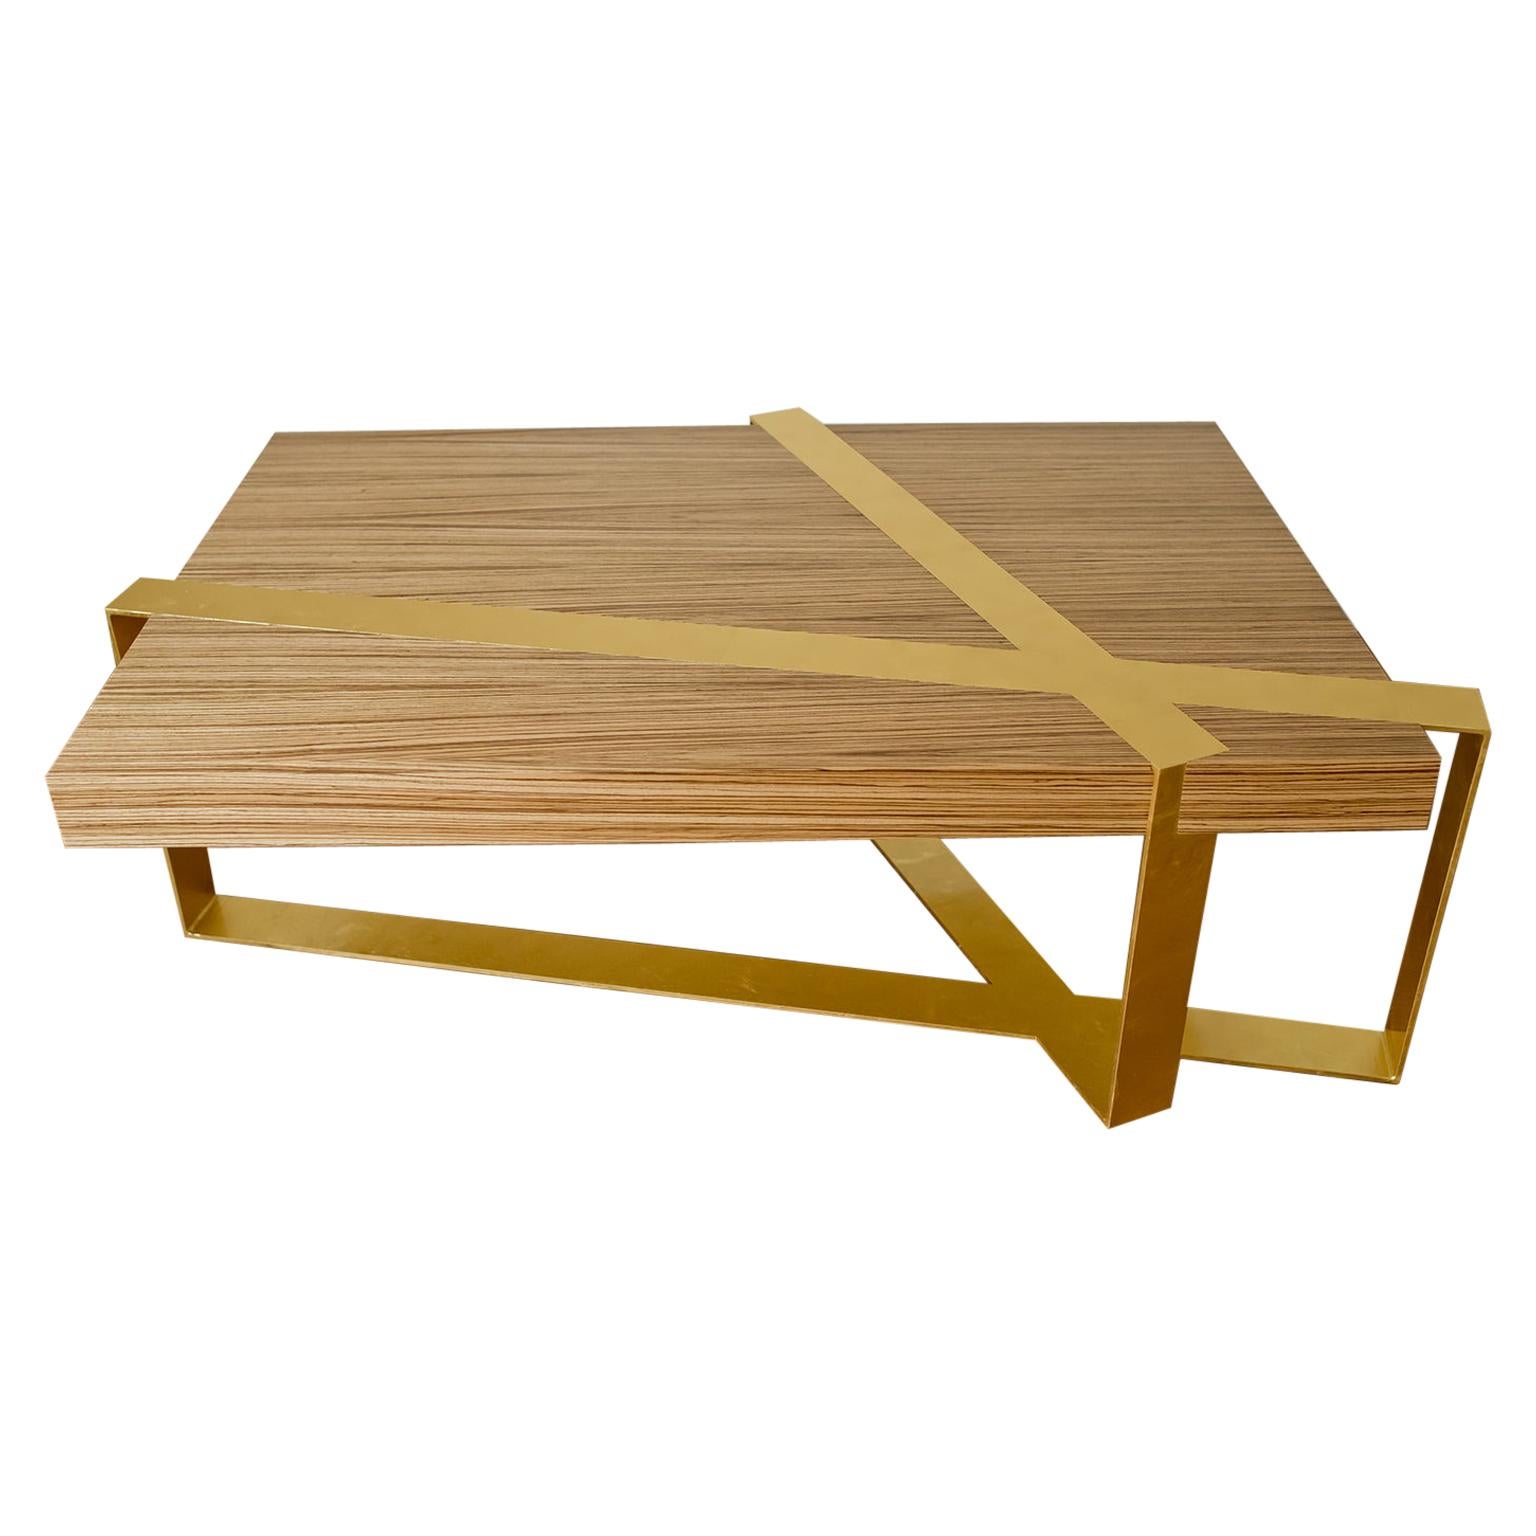 Crosby Coffee Table in Zebra Wood and Gold Leaf by Dean and Dahl